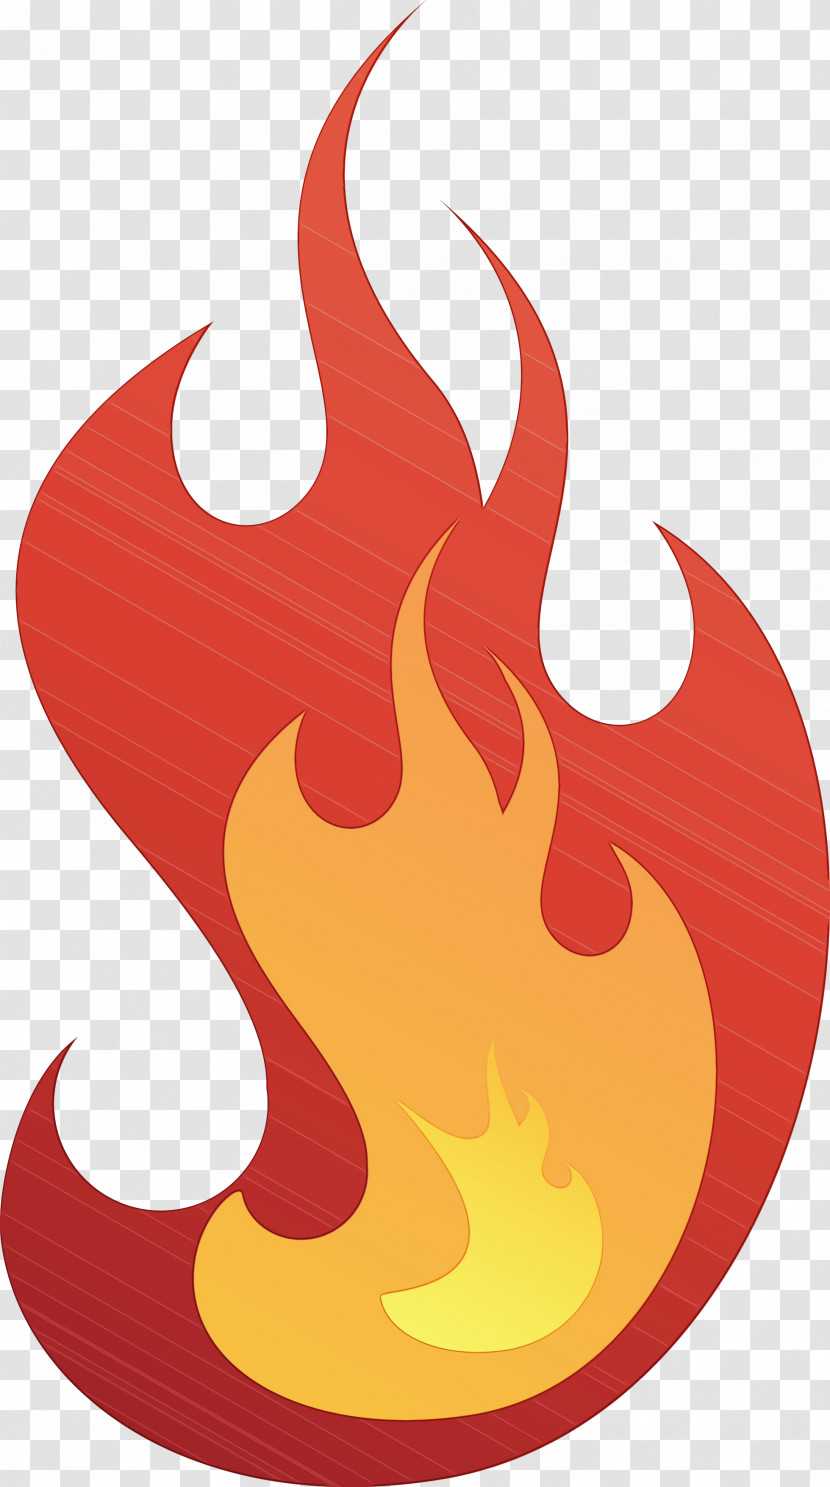 Character Flame Character Created By Transparent PNG